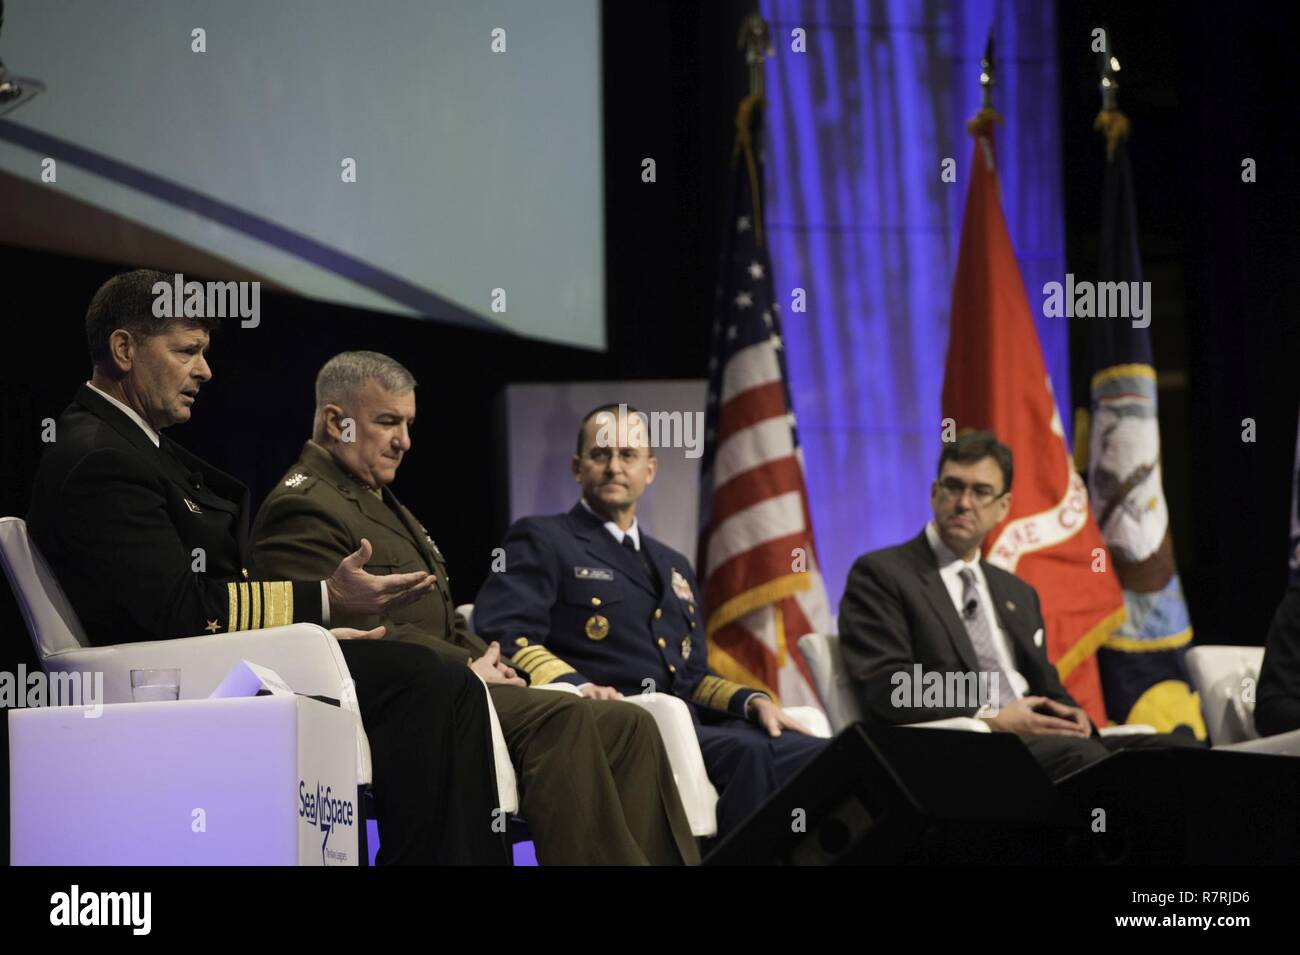 NATIONAL HARBOR, Md. (April 3, 2017) Vice Chief of Naval Operations (VCNO) Vice Adm. William Moran, left, speaks at the 2017 Sea, Air and Space Exposition. Moran was joined by a panel including Assistant Commandant of the U.S. Marine Corps Gen. Glenn Walters, Vice Commandant of the U.S. Coast Guard Adm. Charles Michel, and Joel Szabat, executive director of Maritime Transportation, to discuss a “Sea Services Update” regarding today's maritime environment. The annual event, founded in 1965, is the largest maritime exposition in the U.S. and brings together key military decision makers, U.S. def Stock Photo